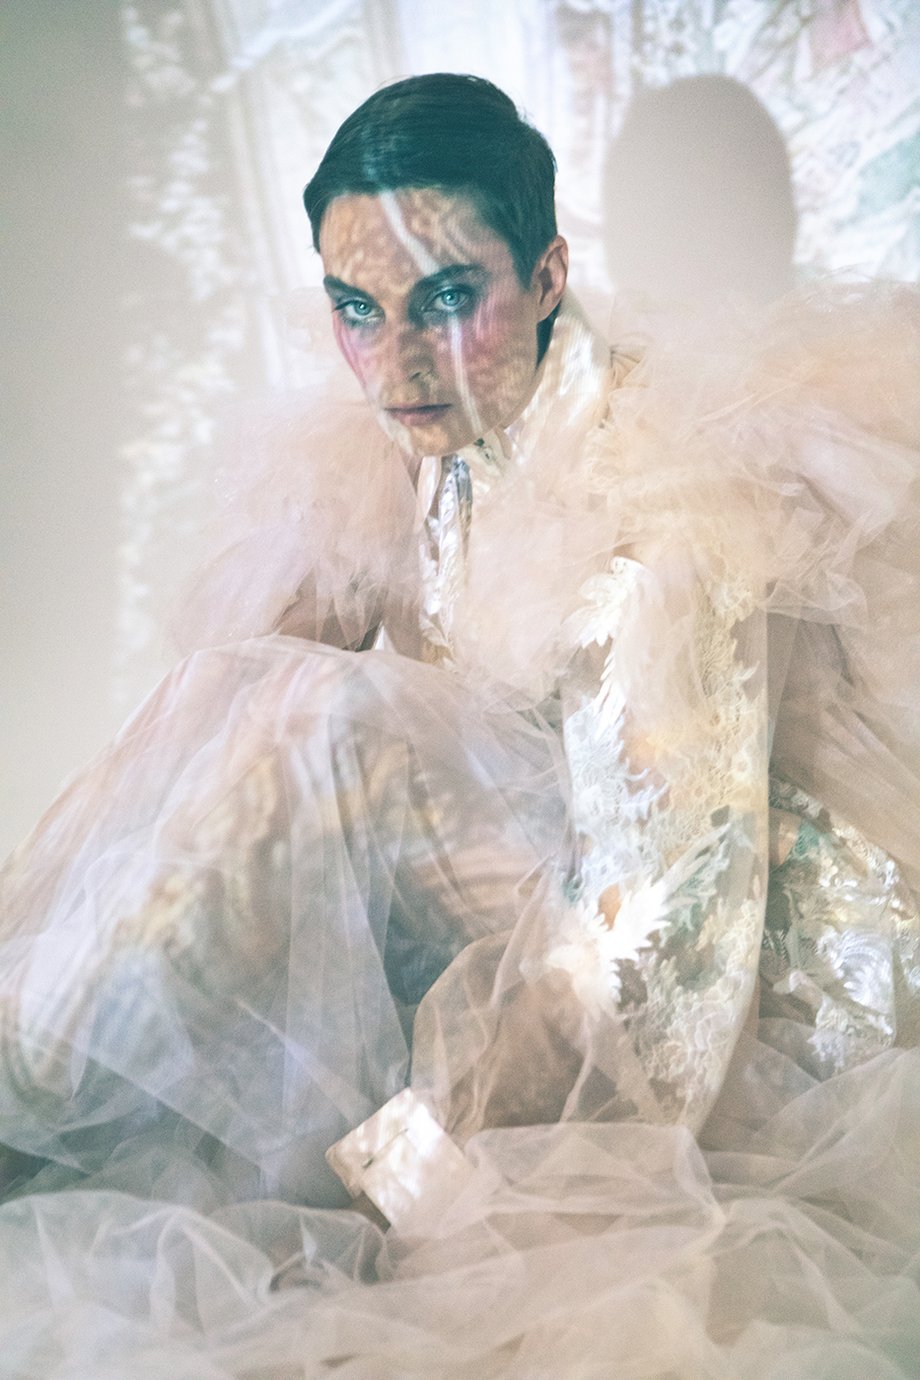 Model Amelia Pool lace and toile coat with projected Renaissance art lighting her face shot by Kirsten Miccoli